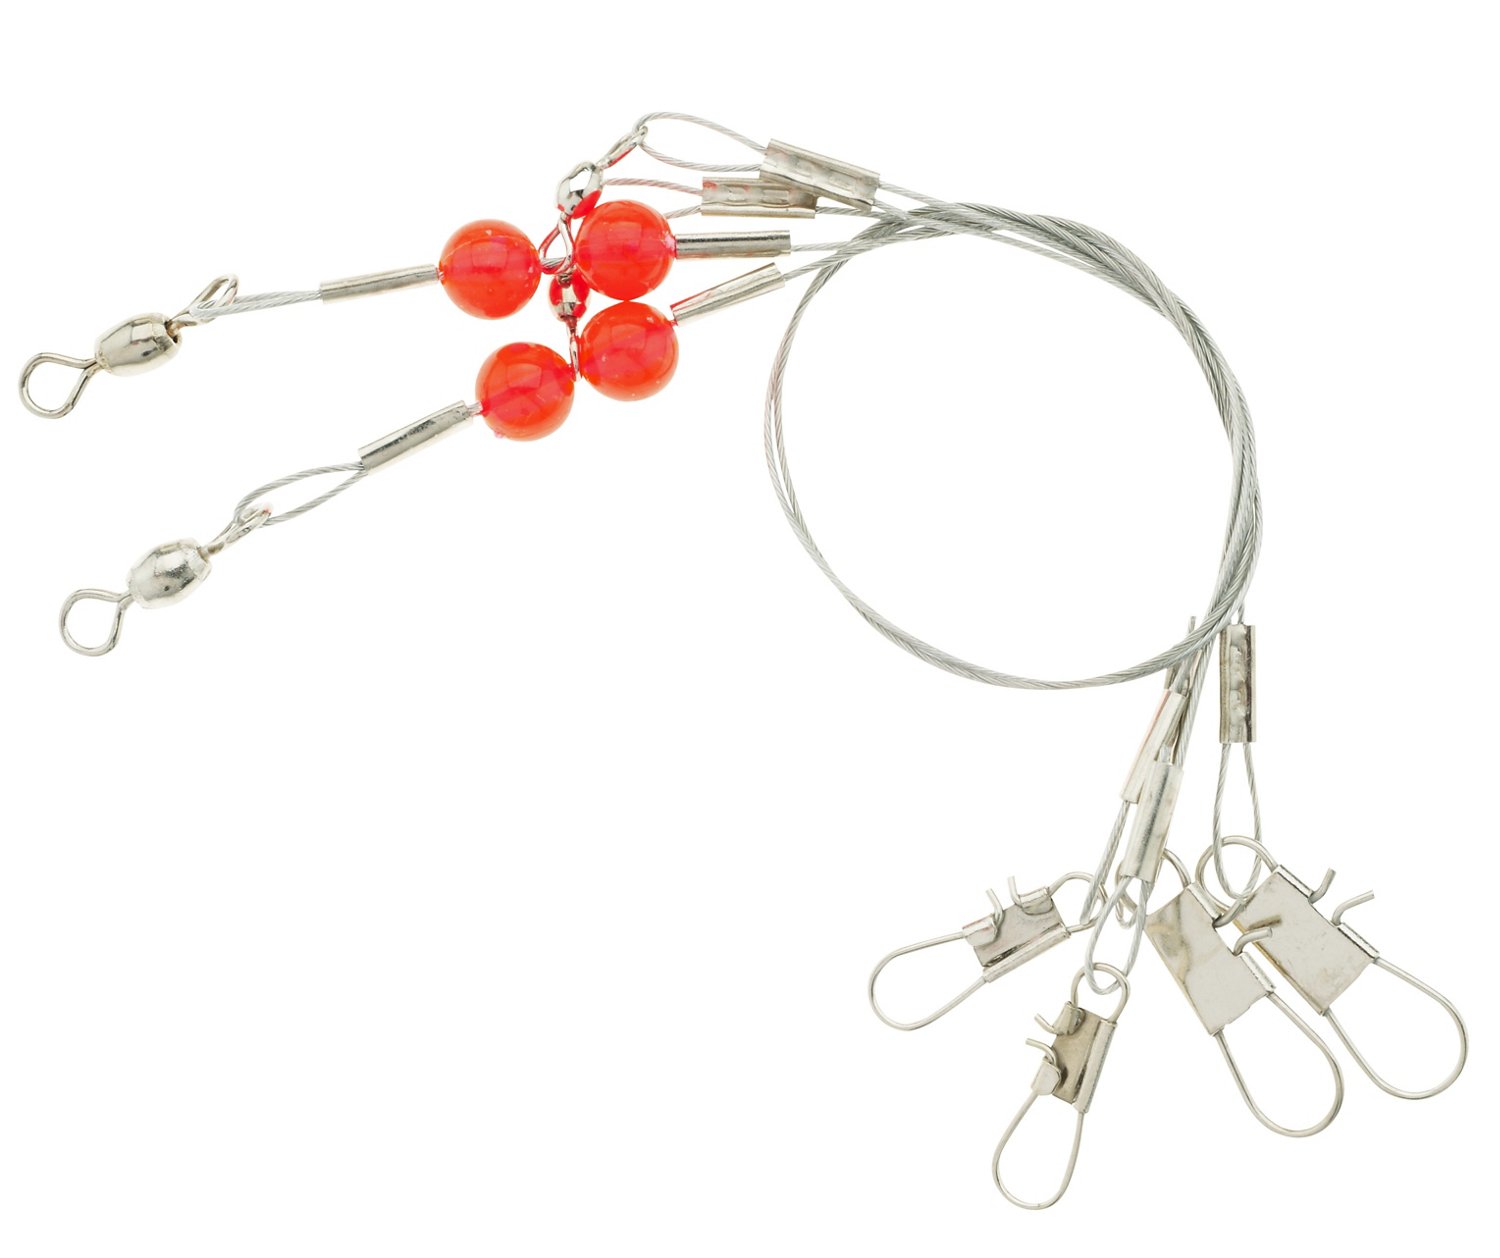 Eagle Claw 24 Double Drop Wire Leader Rigs 2-Pack